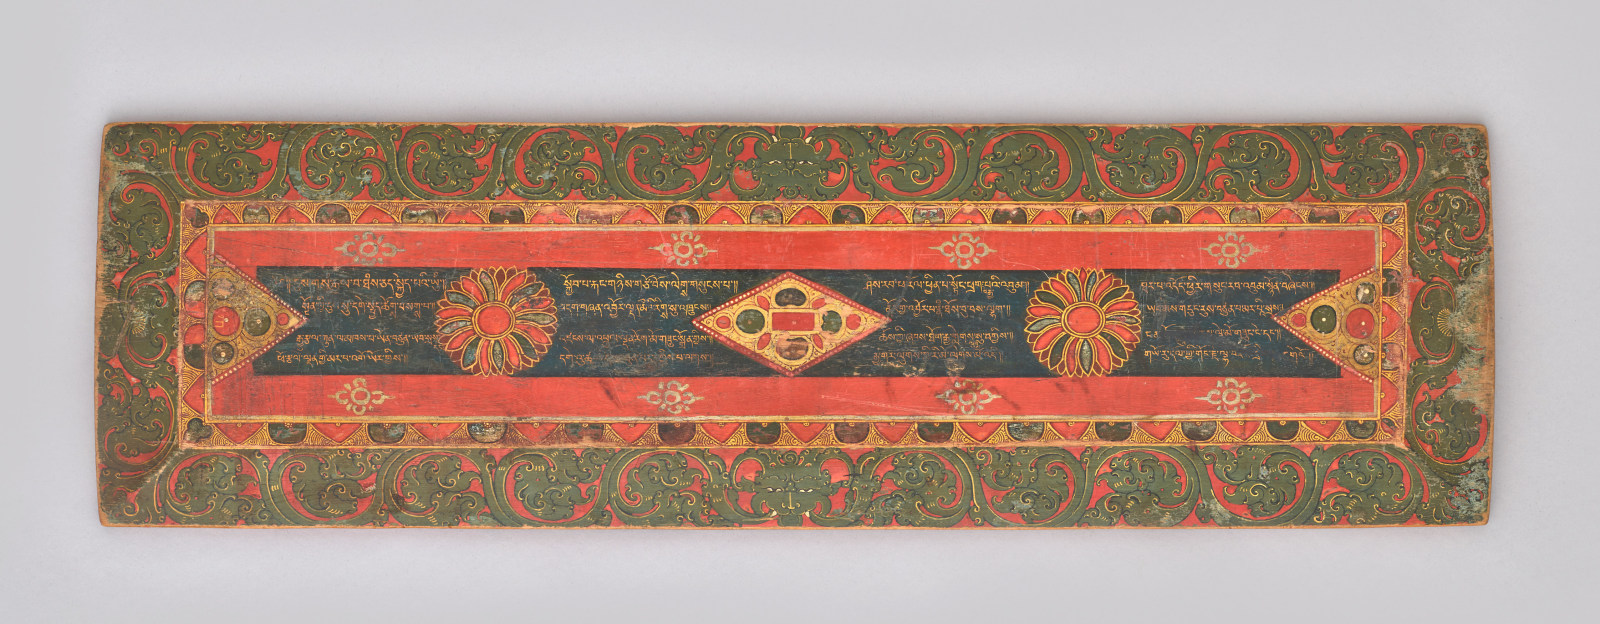 this remarkable cover is an aesthetically elegant and rare object and contains a sixteen-lined poem, beautifully executed in calligraphy by Marpa Gyor